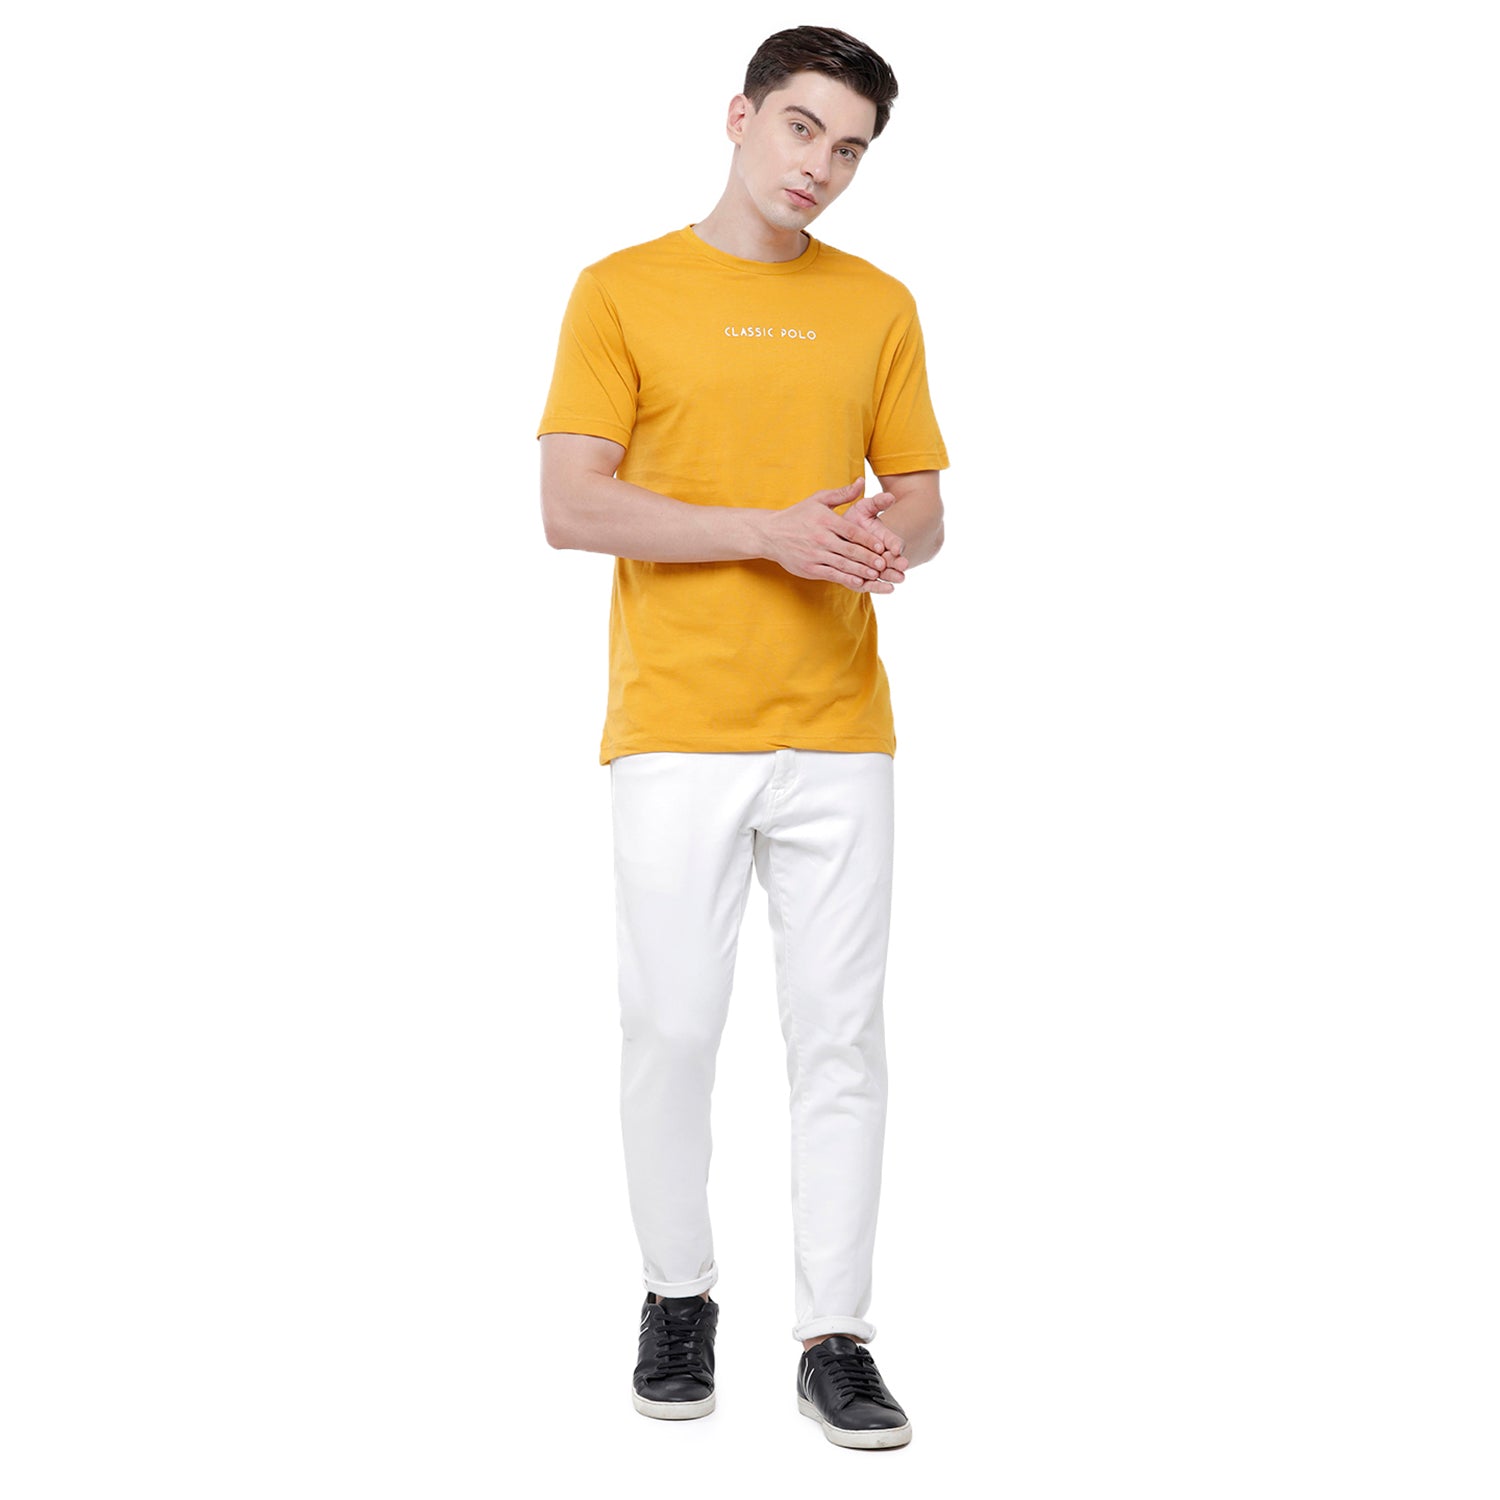 Classic polo Men's Basic Solid Single Jersey Crew Half Sleeve Slim Fit T-Shirt ( Trio Pack) - Ceres - 03 Classic Polo 